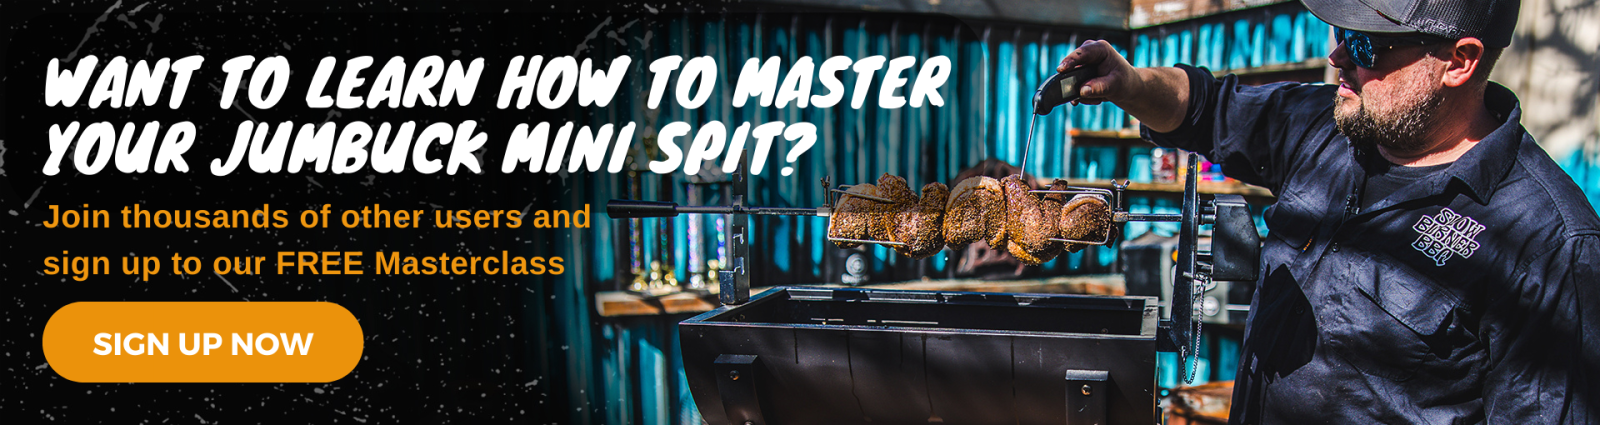 Want to learn how to master your jumbuck mini spit?